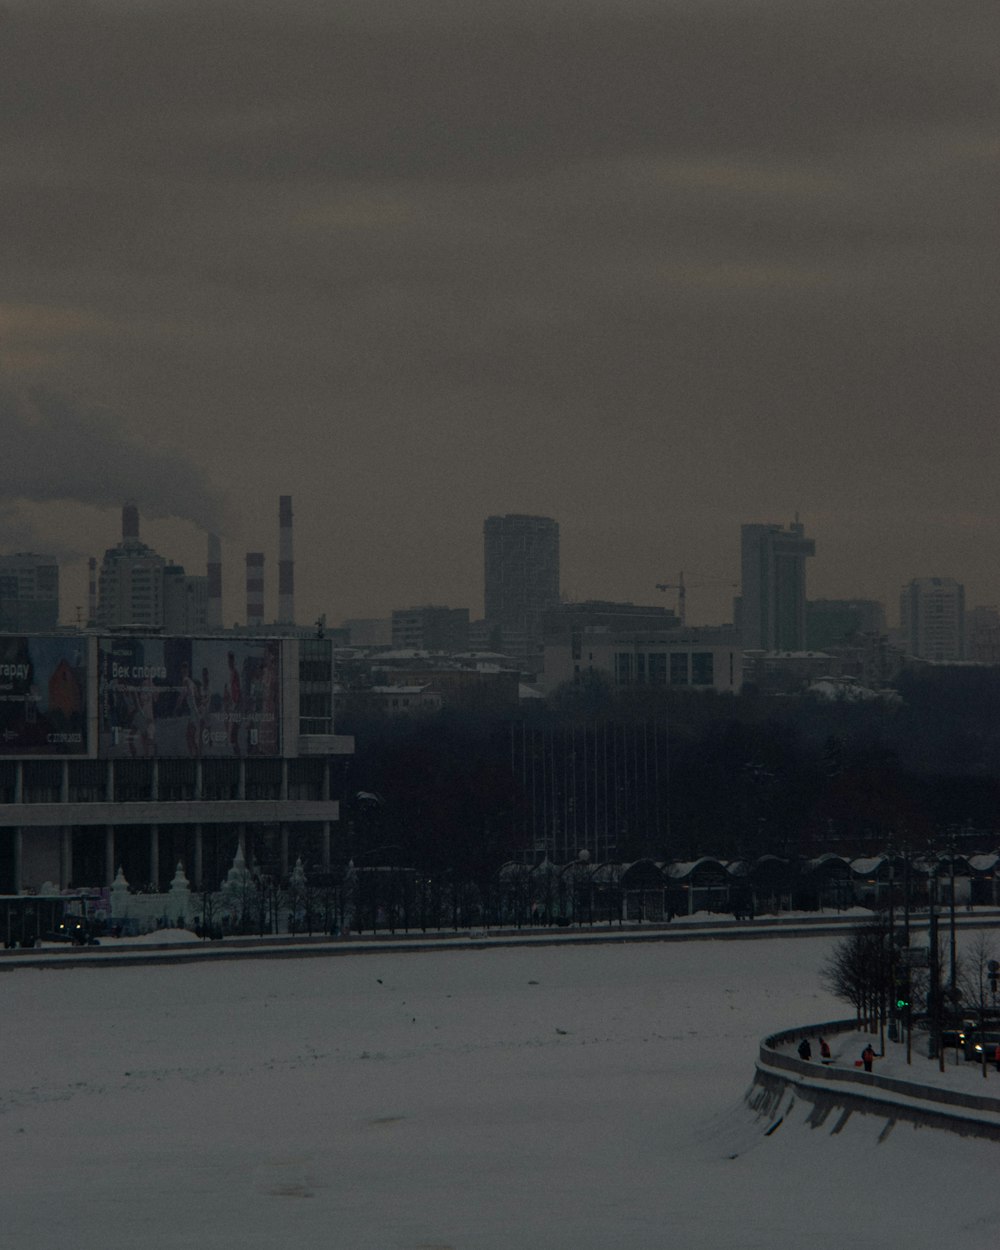 a view of a city from across a snowy field